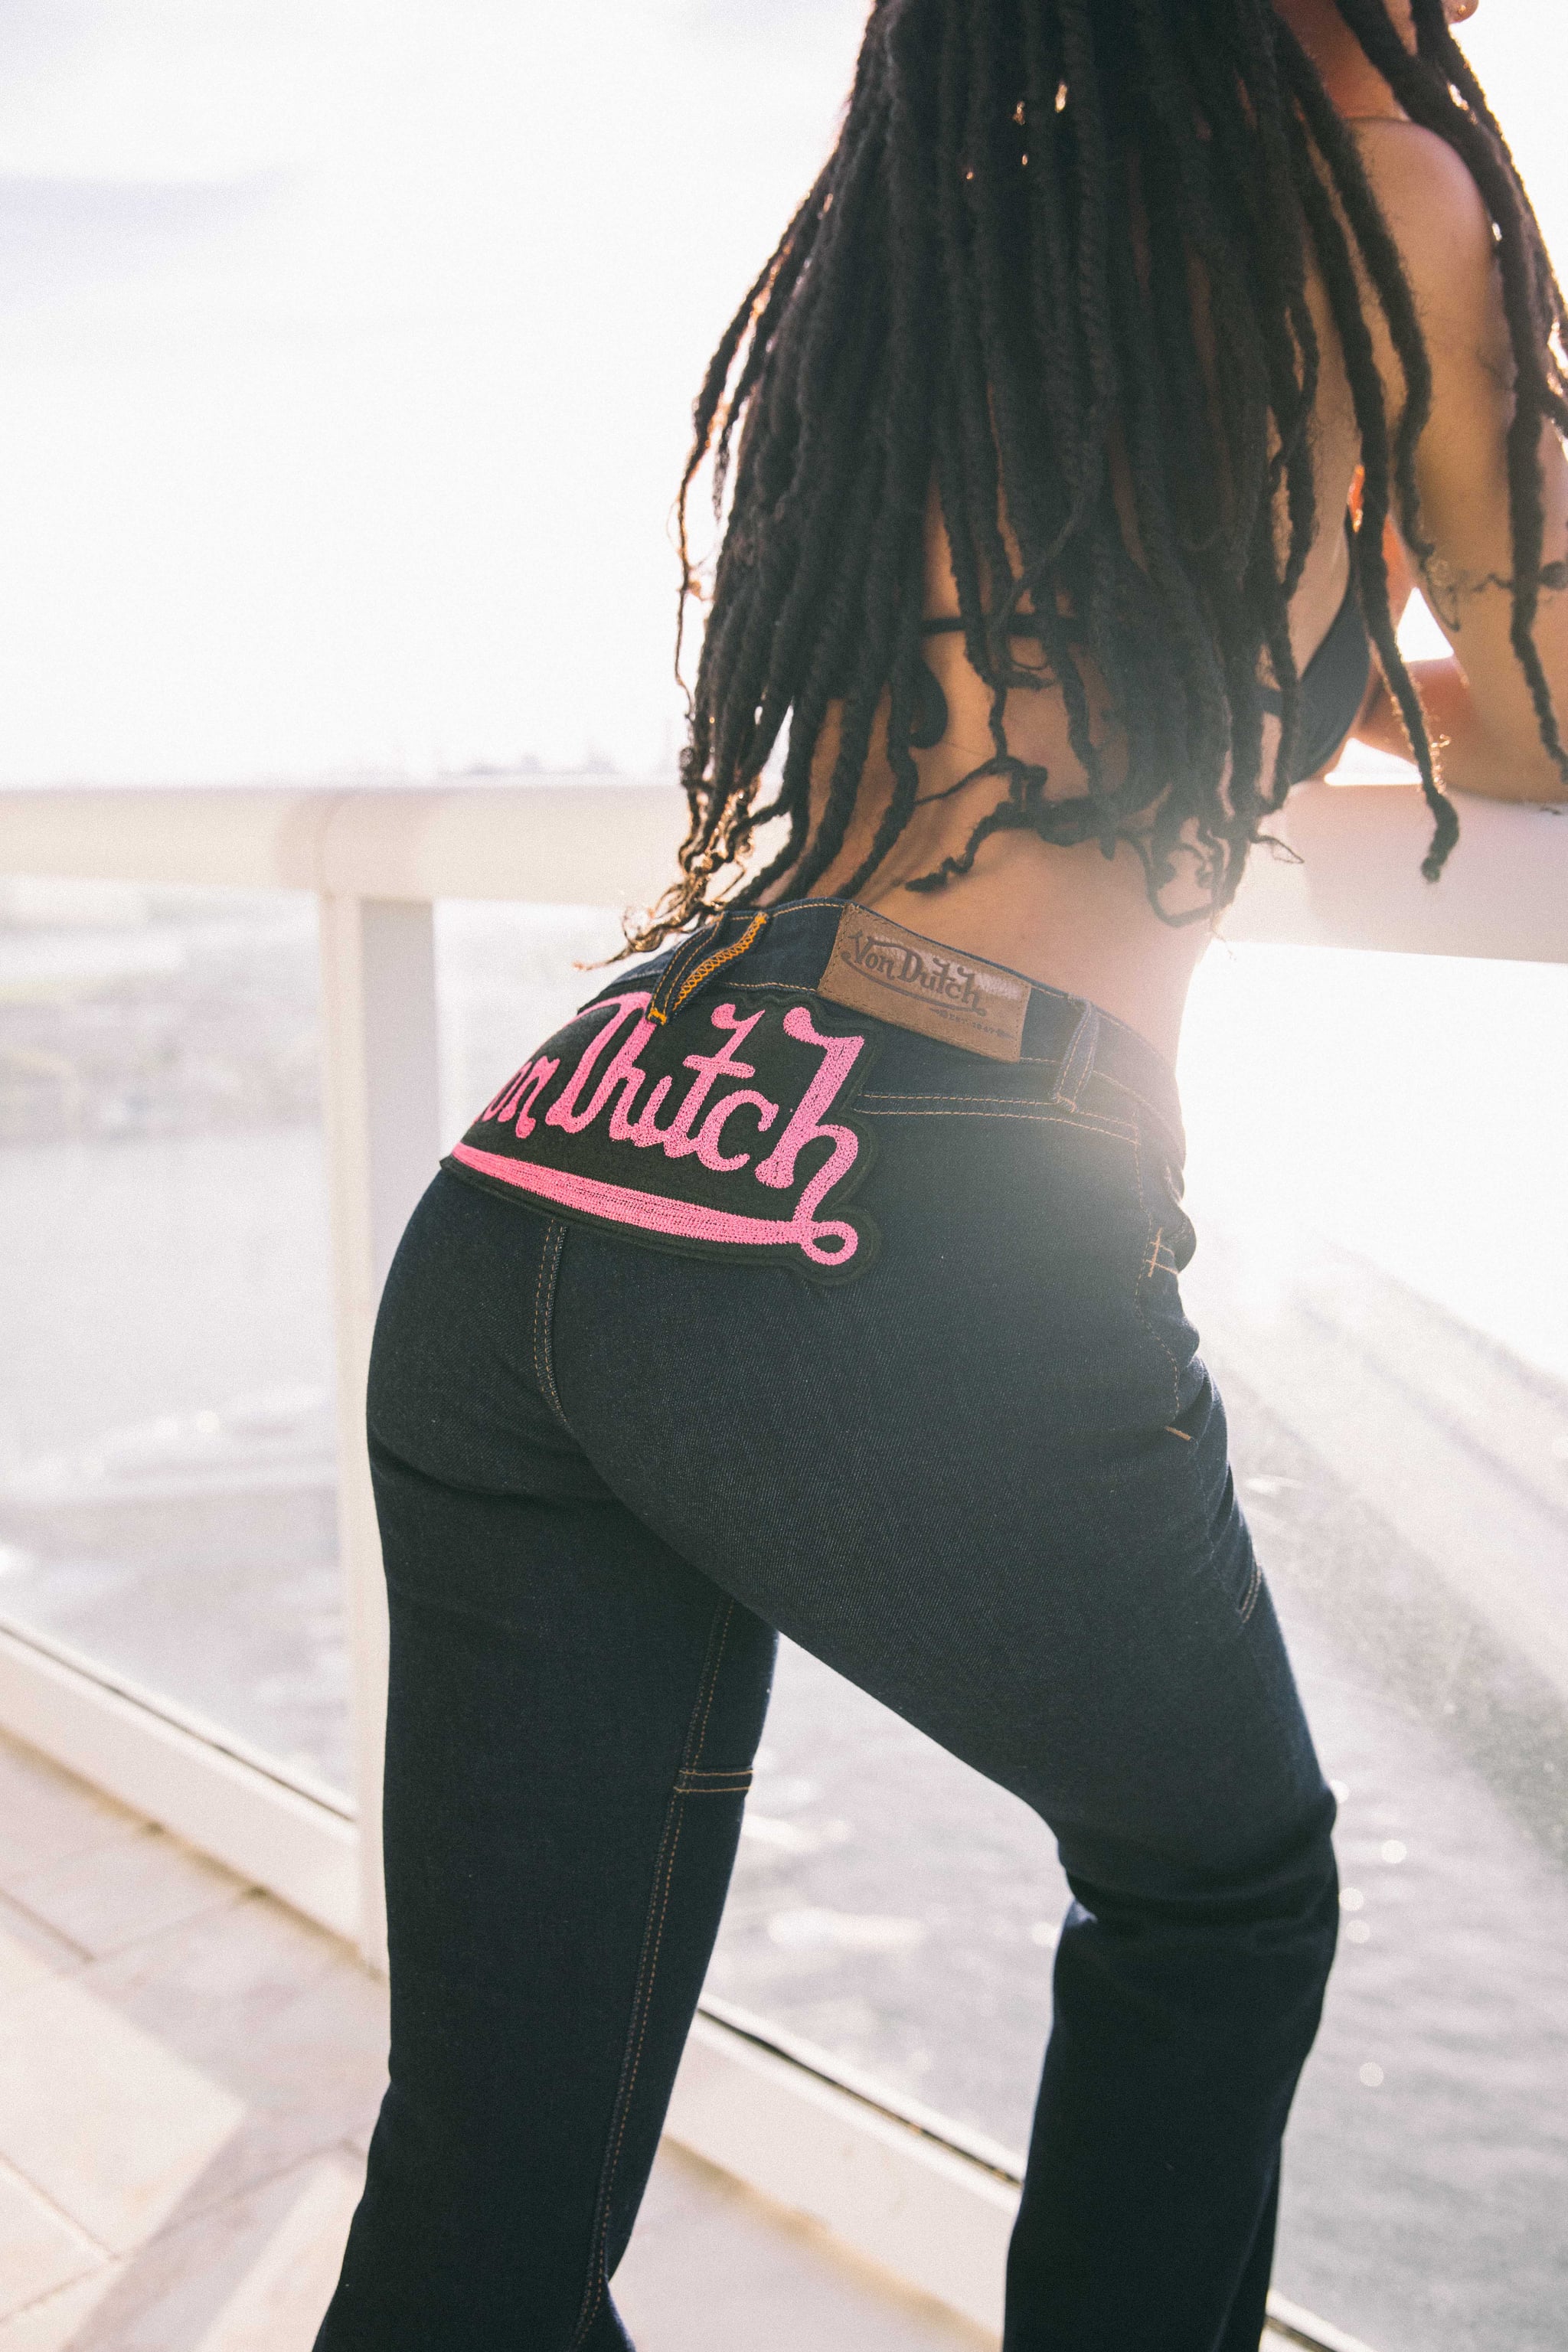 00s fashion: How Von Dutch rose from the ashes